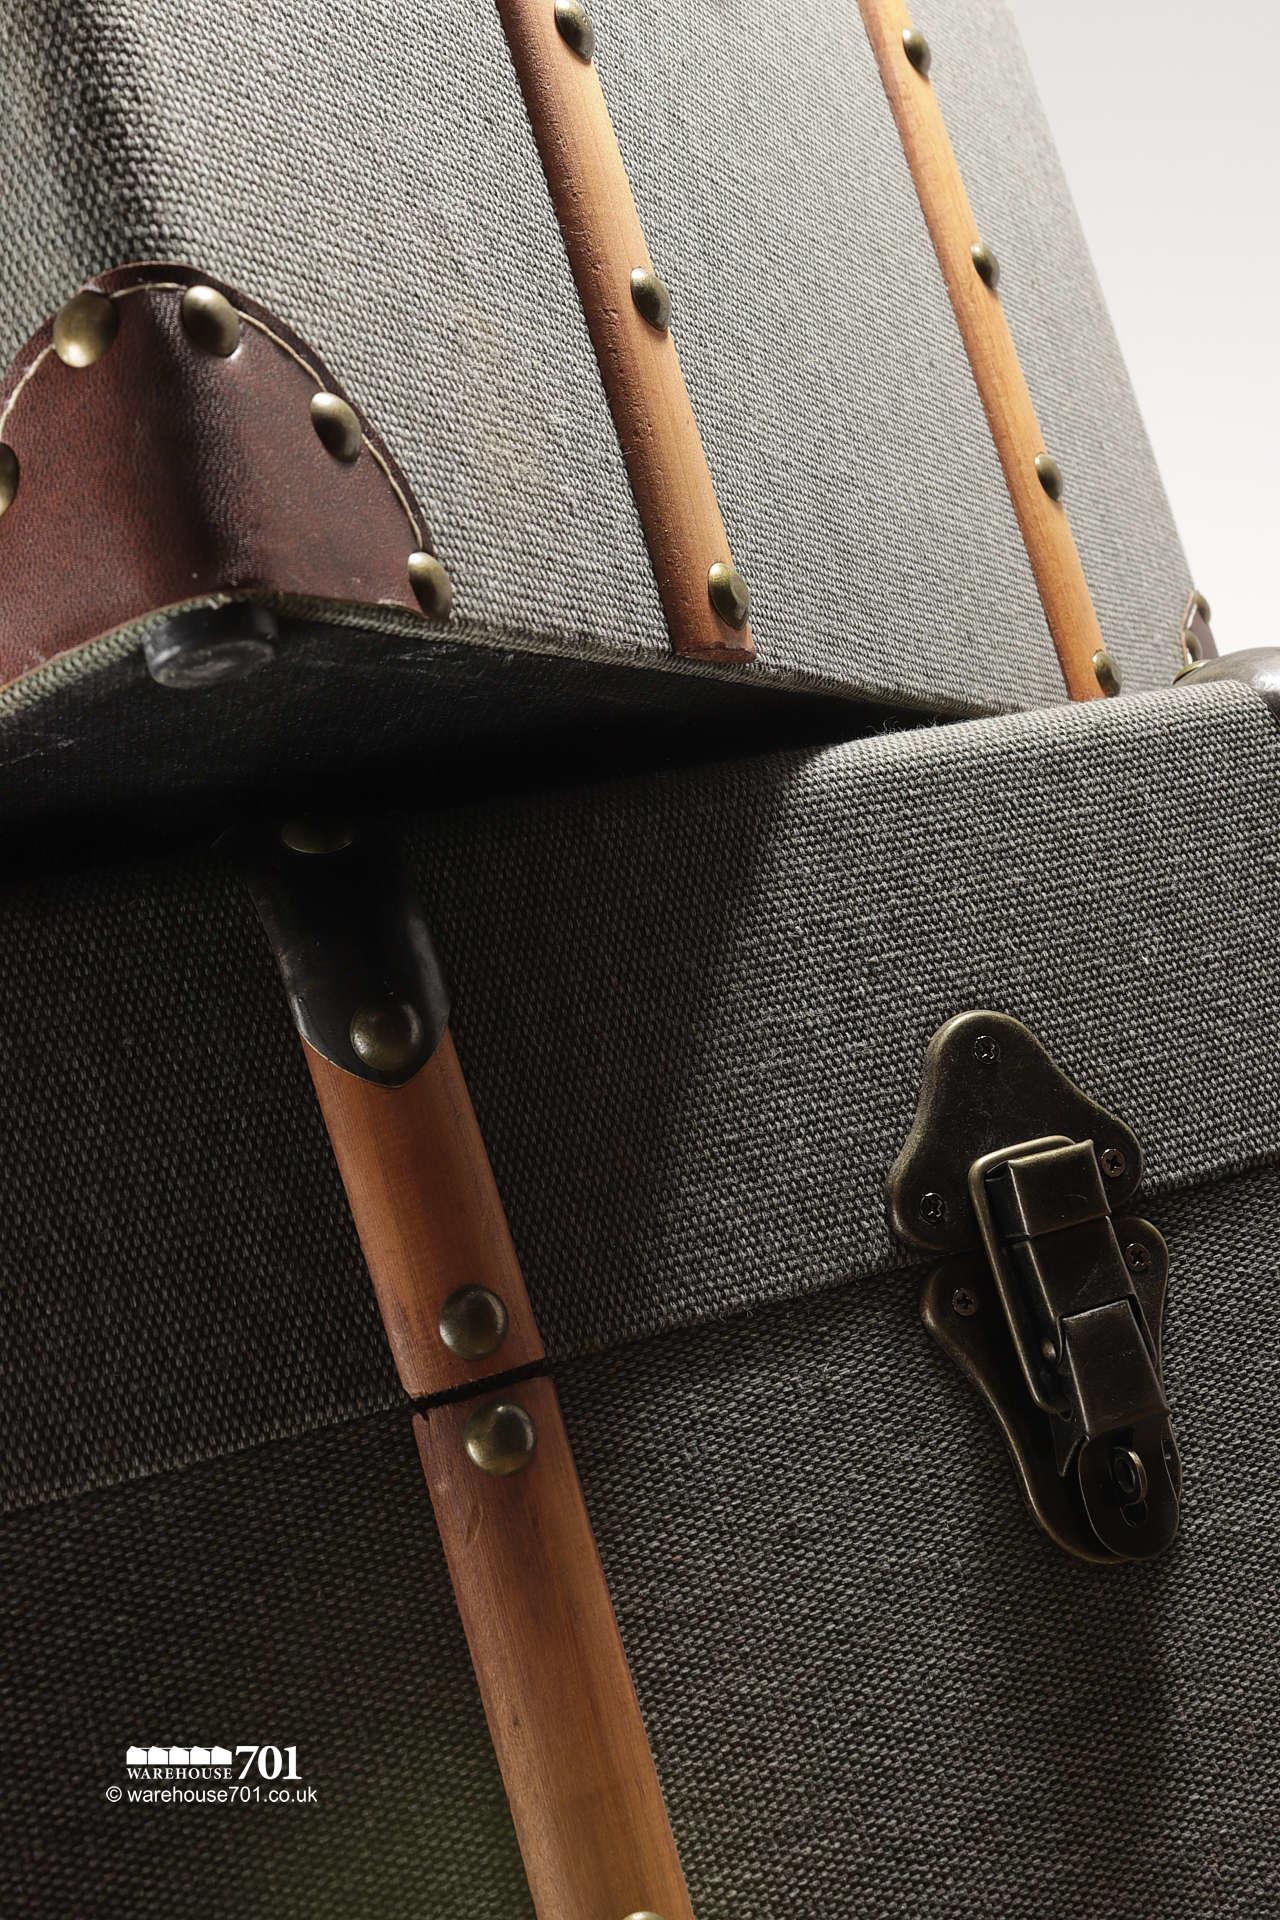 NEW Khaki Fabric Covered Storage Trunks with Leather and Wood Detailing #7